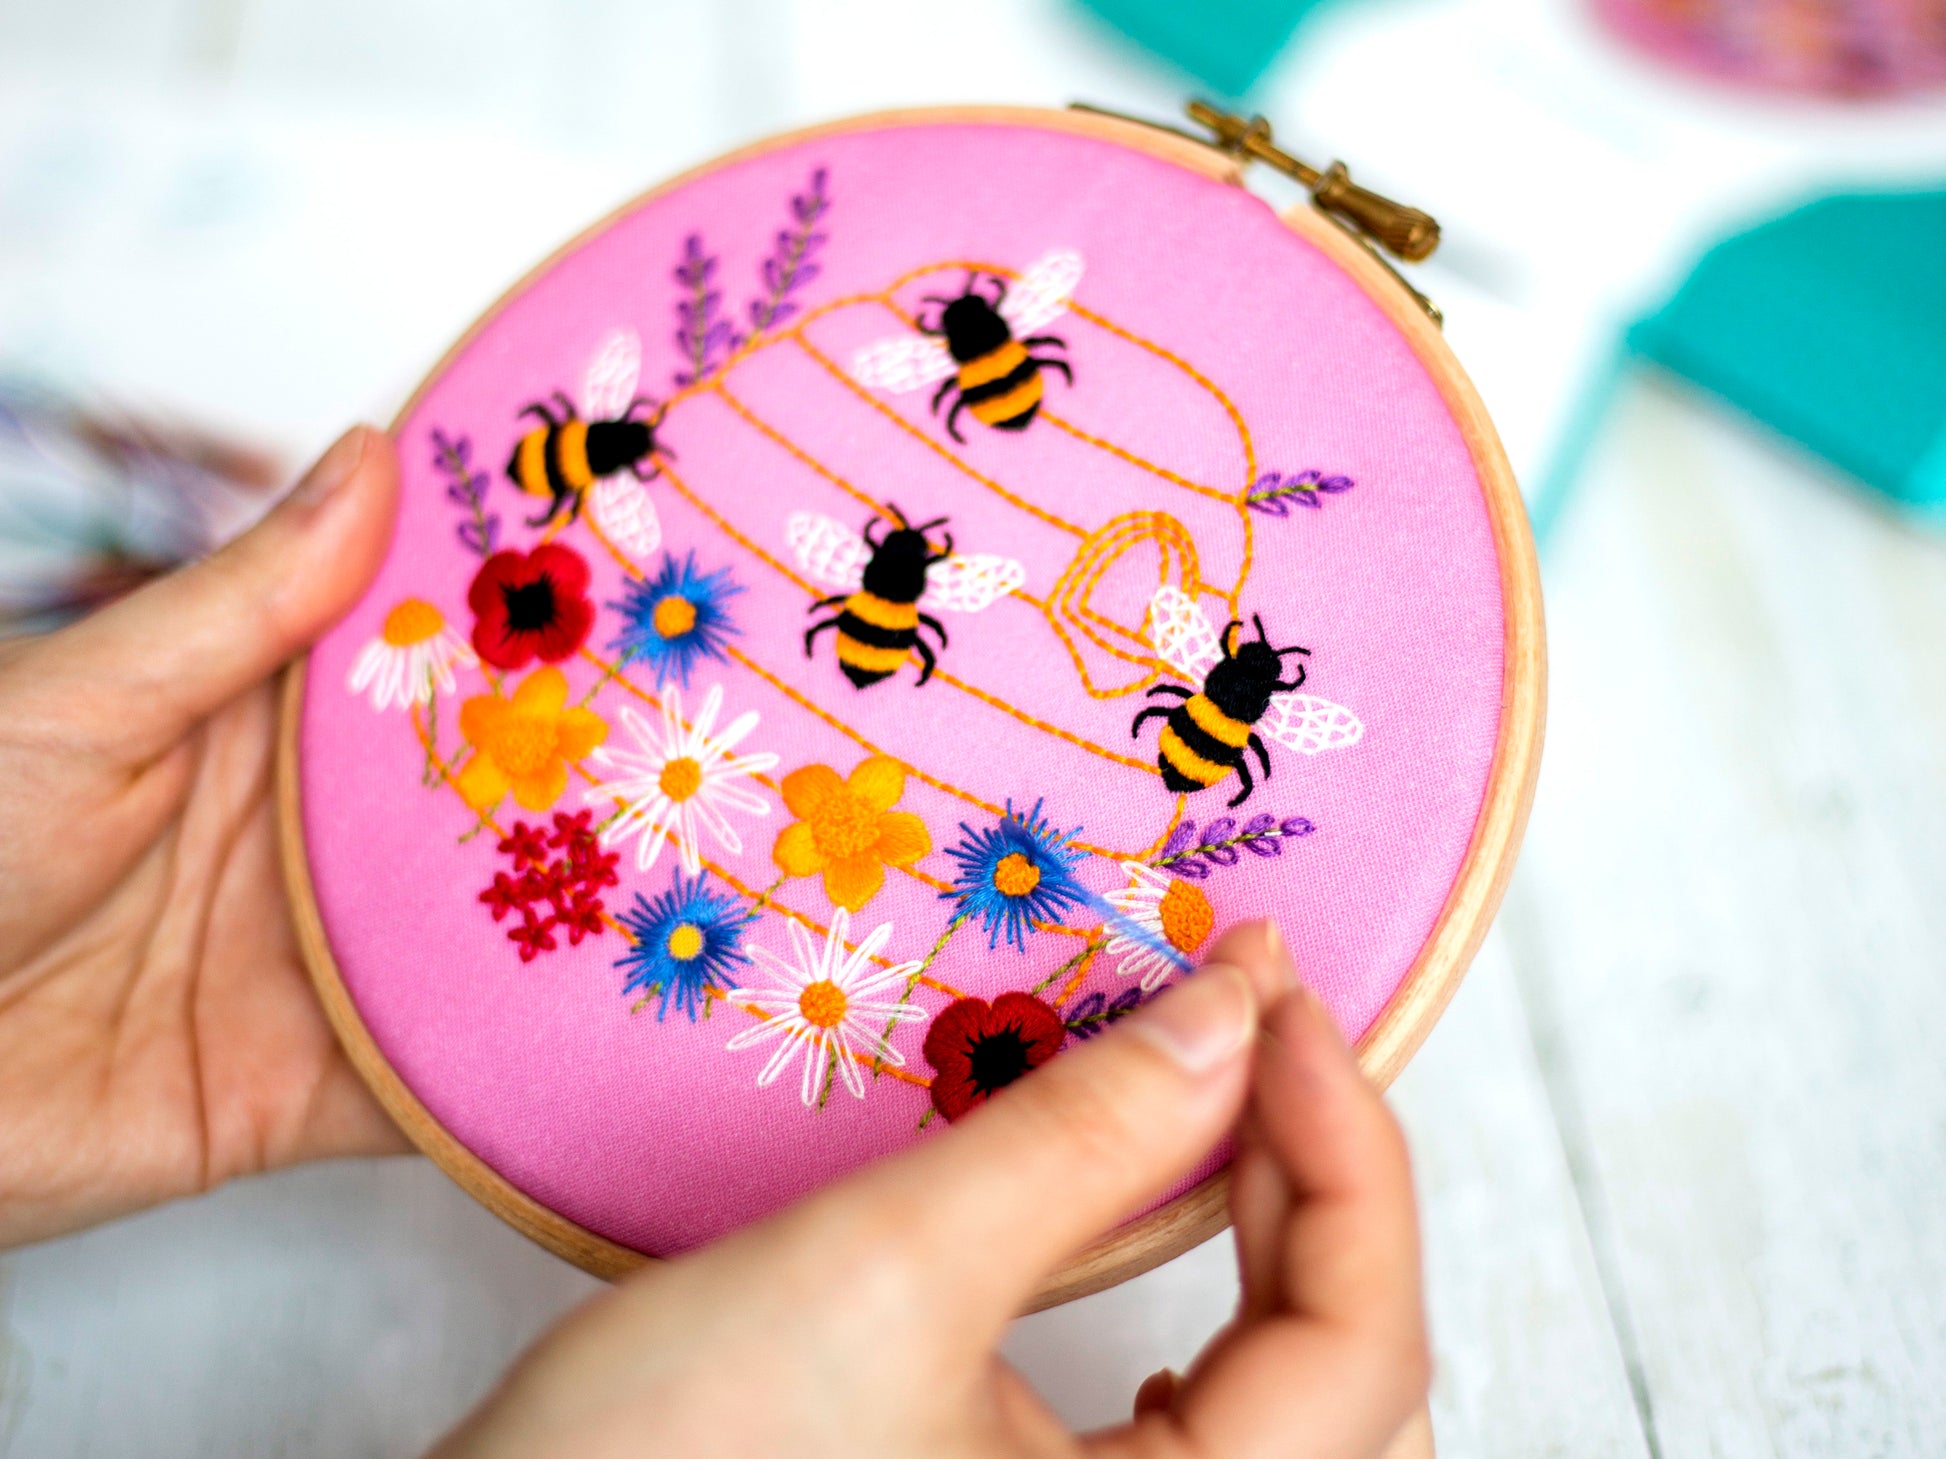 Honey Bees and Wildflowers Embroidery Kit - Embroidery Kits - ohsewbootiful